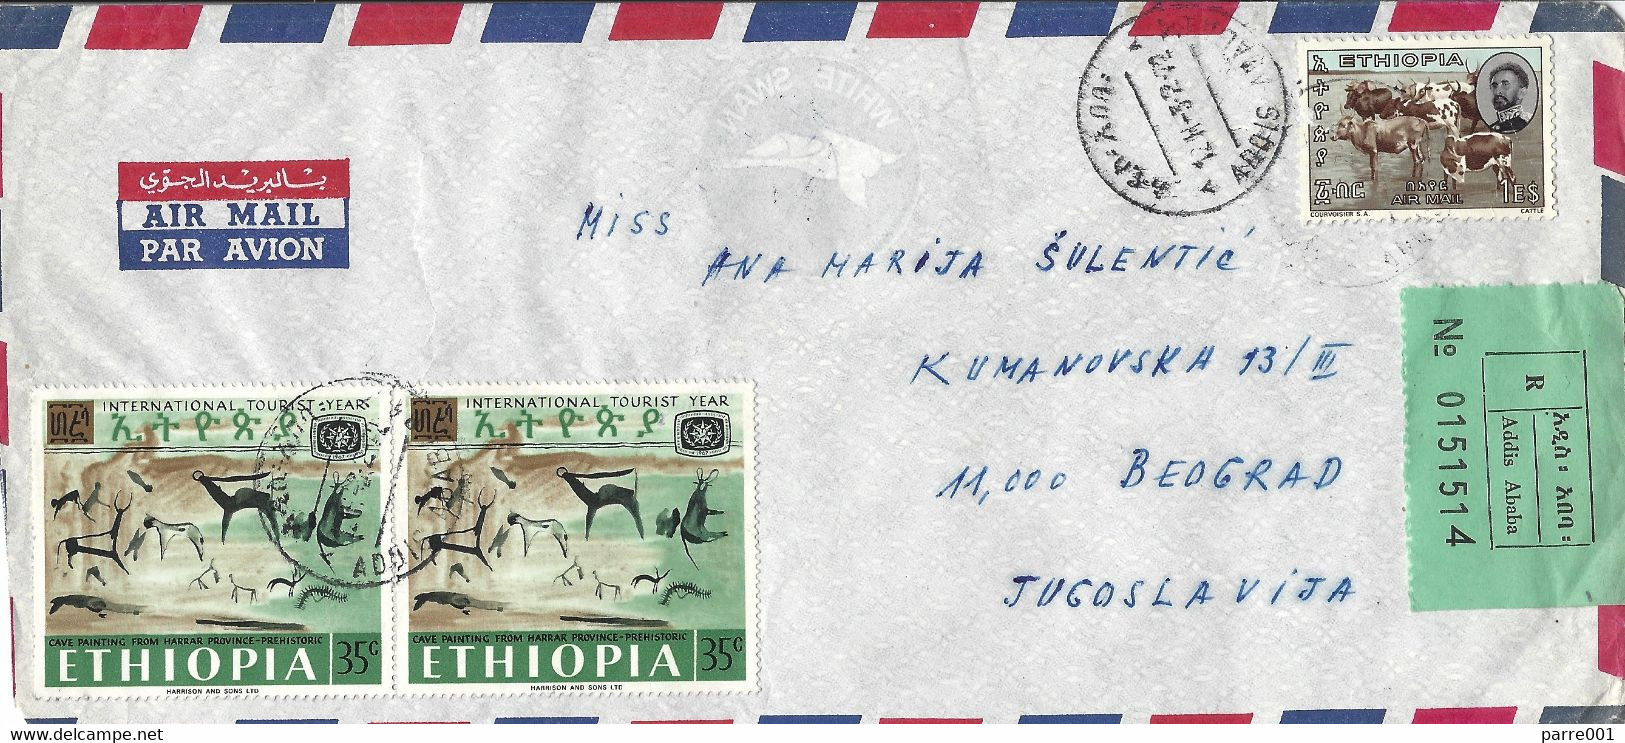 Ethiopia 1972 Addis Ababa Cave Rock Paintings Harrar United Nations Security Council Meeting Handstamp Registered Cover - Vor- Und Frühgeschichte